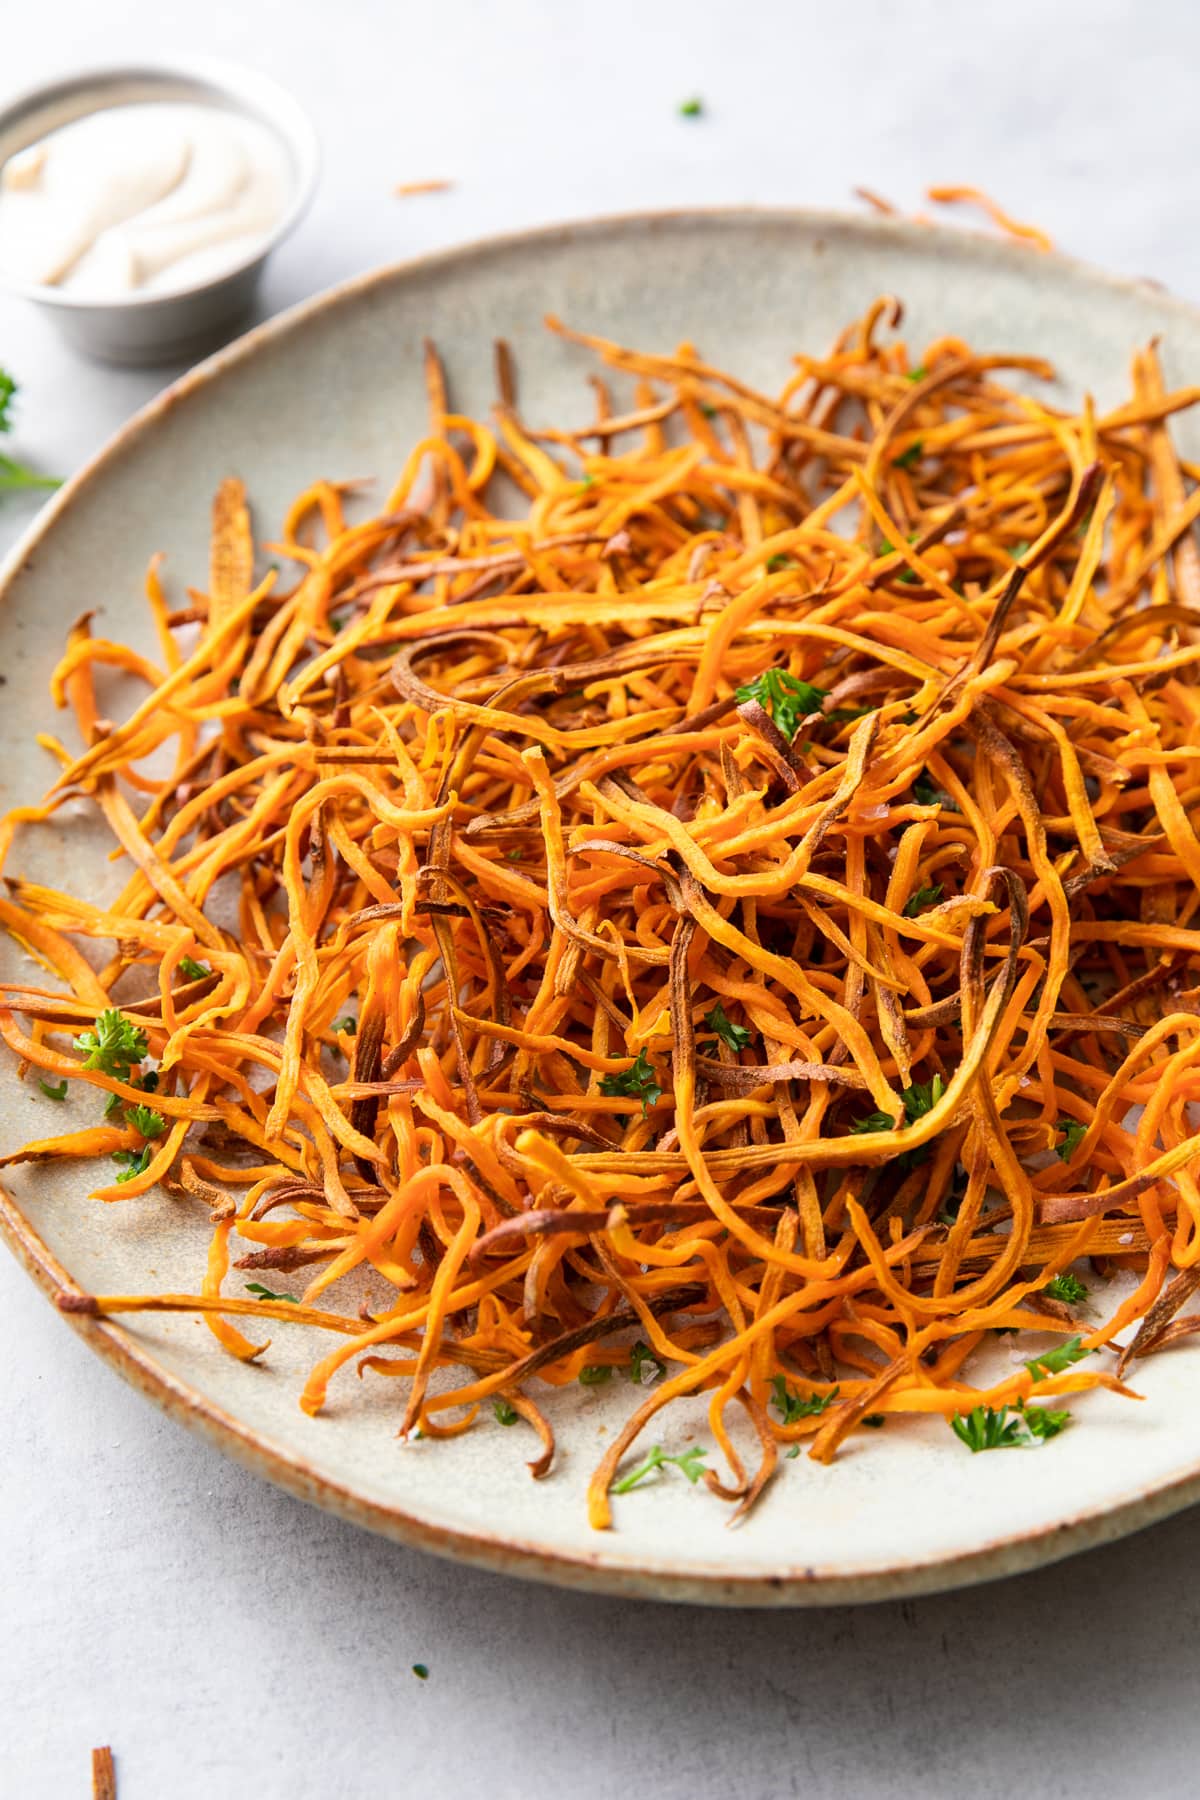 side down view of plate of freshly made baked crispy sweet potato shoestring fries curly style.